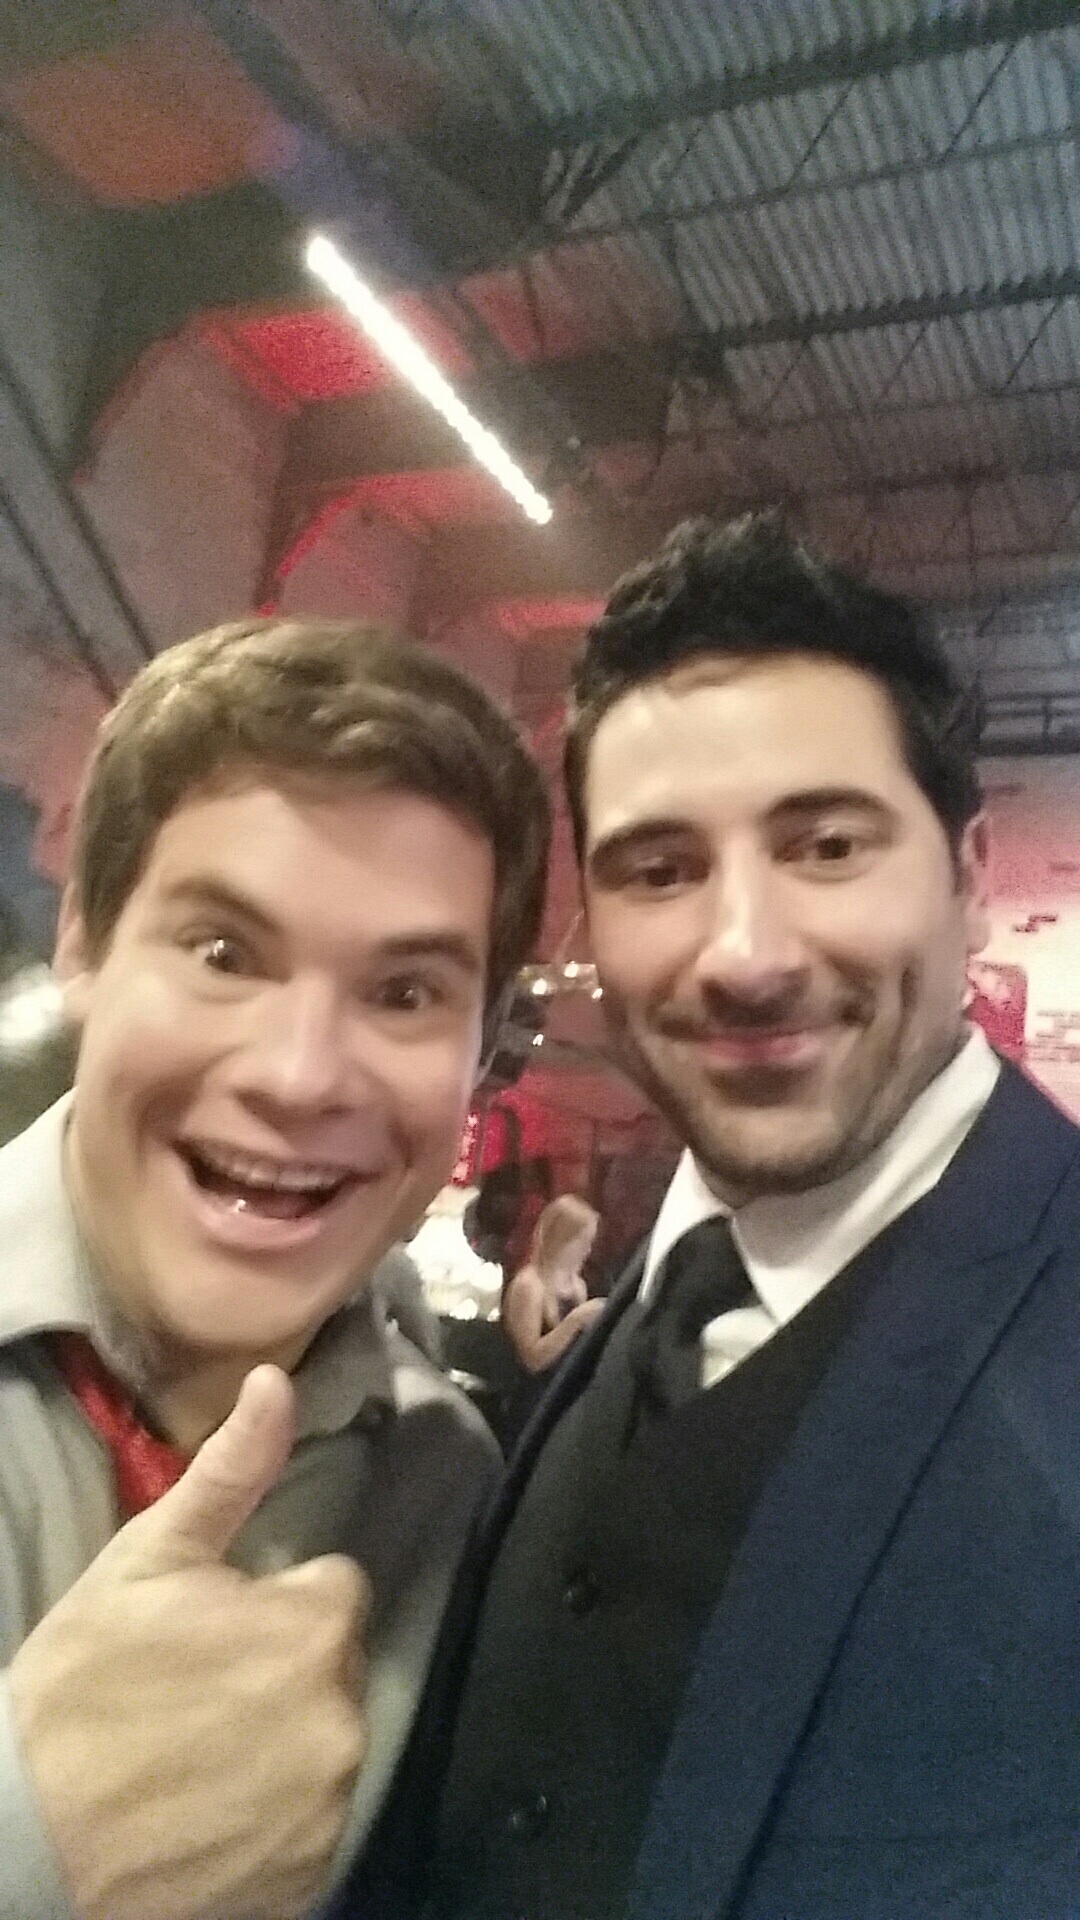 Me and Adam Devine on the set of Pitch Perfect 2.